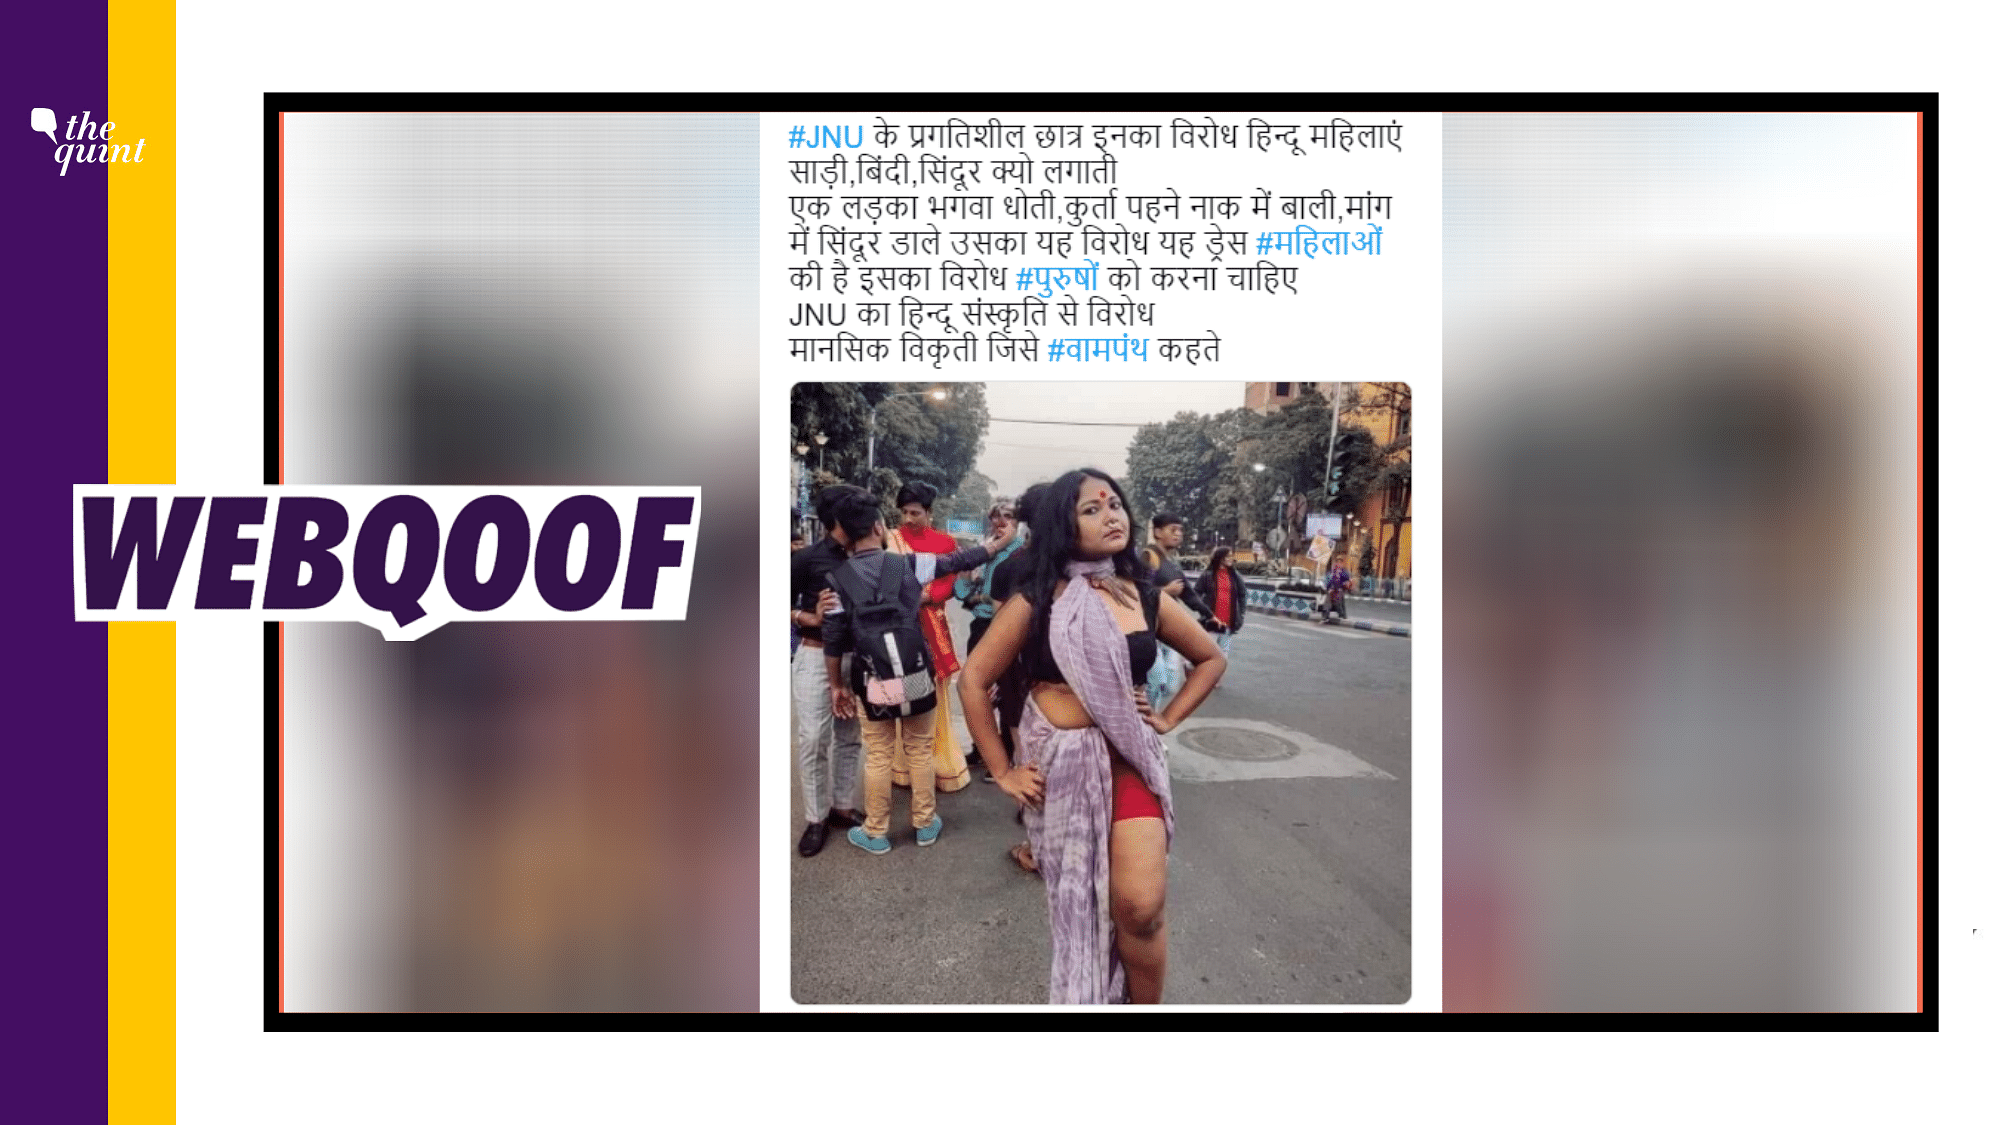 The image is from Kolkata’s pride walk in 2019 and not affiliated to JNU in anyway.